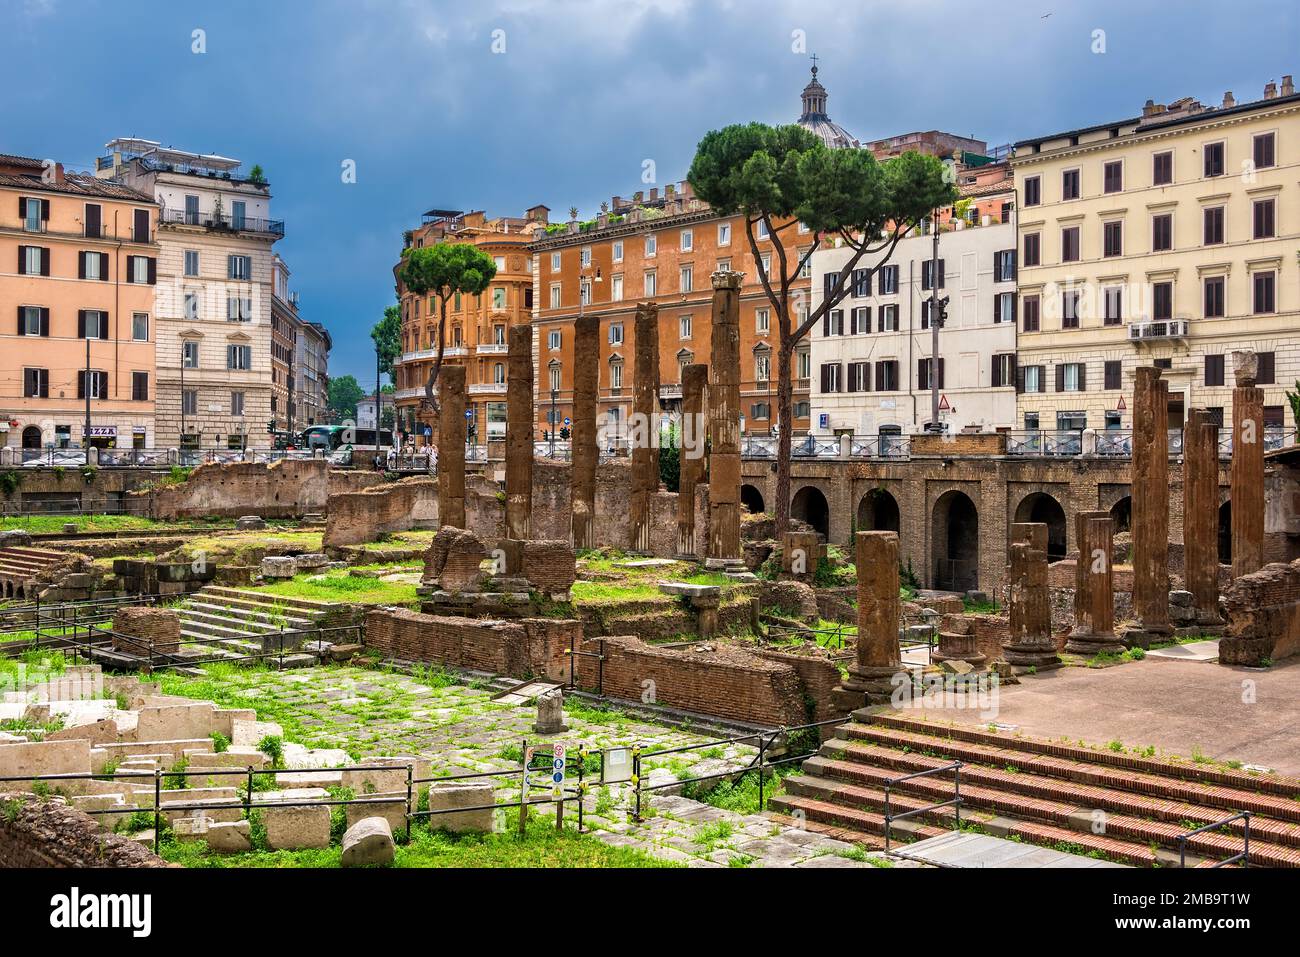 Rome, Italy - June 10, 2016:  Largo di Torre Argentiina, a square that has four Republican Roman Temples and the remains of Pompey's Theatre. Stock Photo